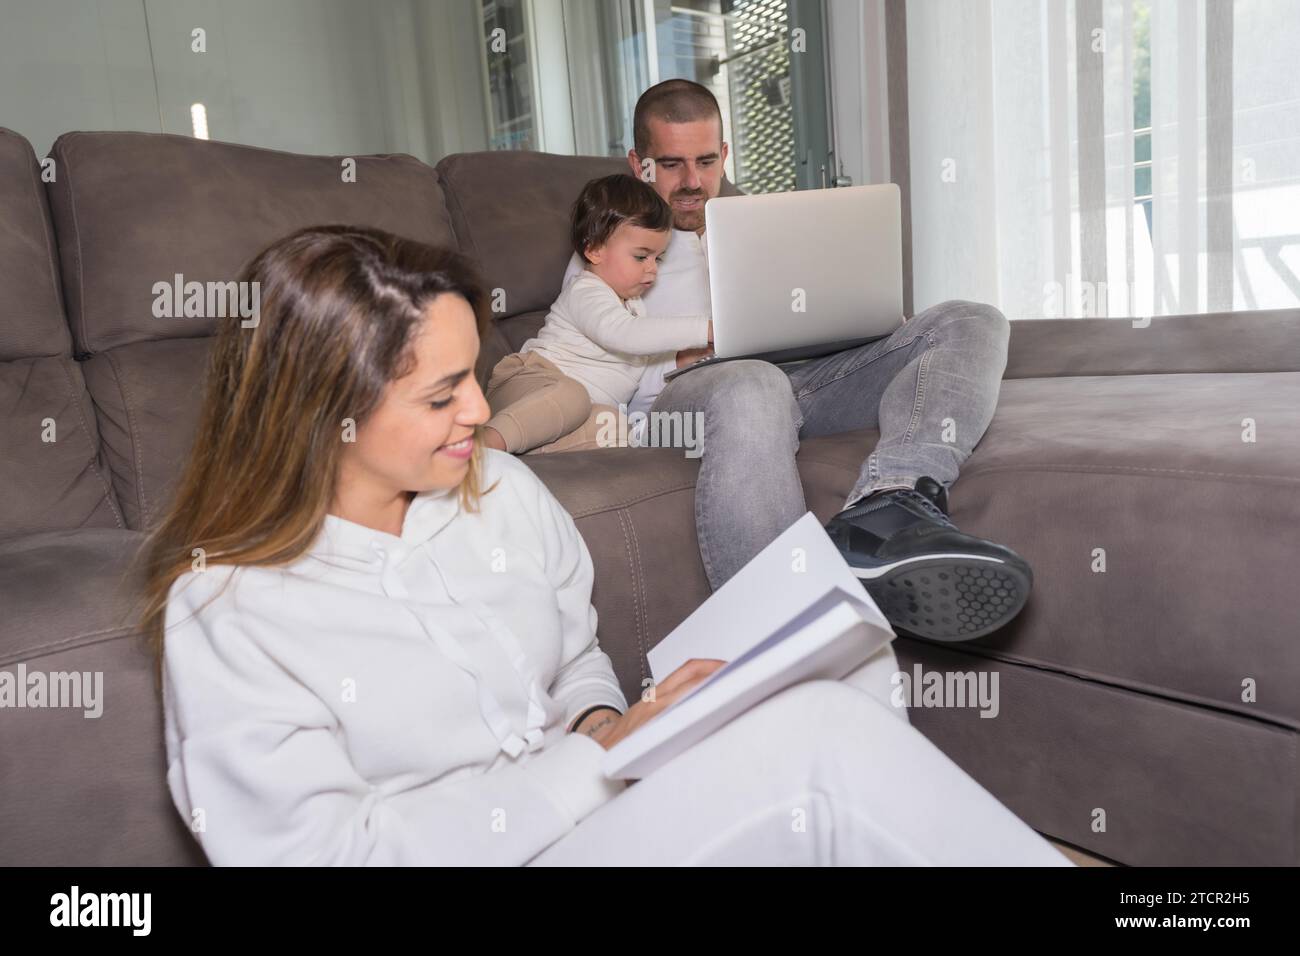 Mother is reading a book while a father is using laptop sitting on the sofa during weekend activities of a family with one child at home Stock Photo